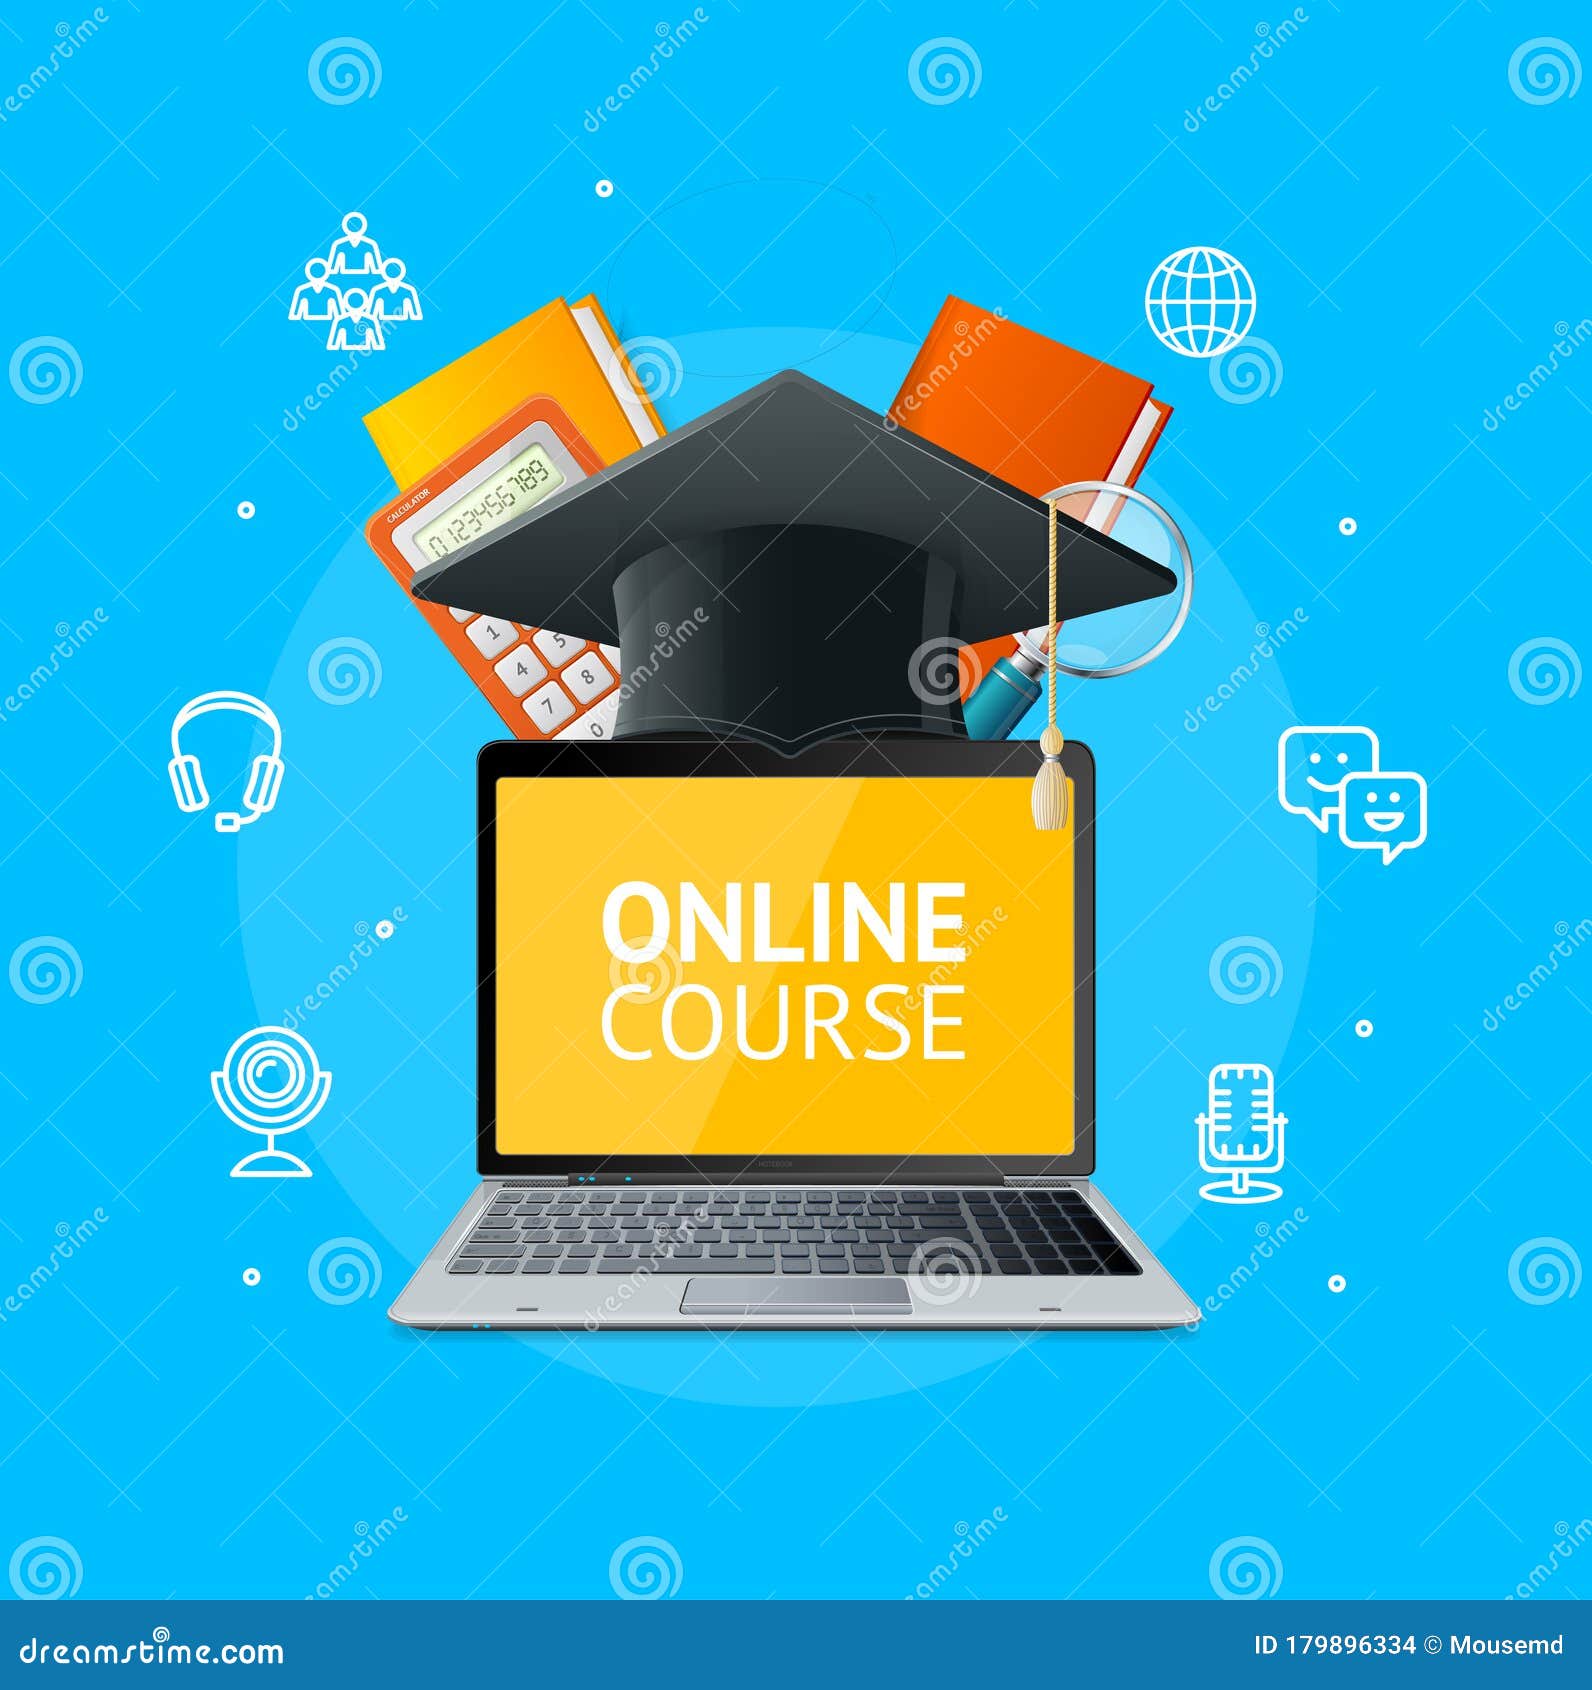 Download Online Course Education Concept With Realistic Detailed 3d ...